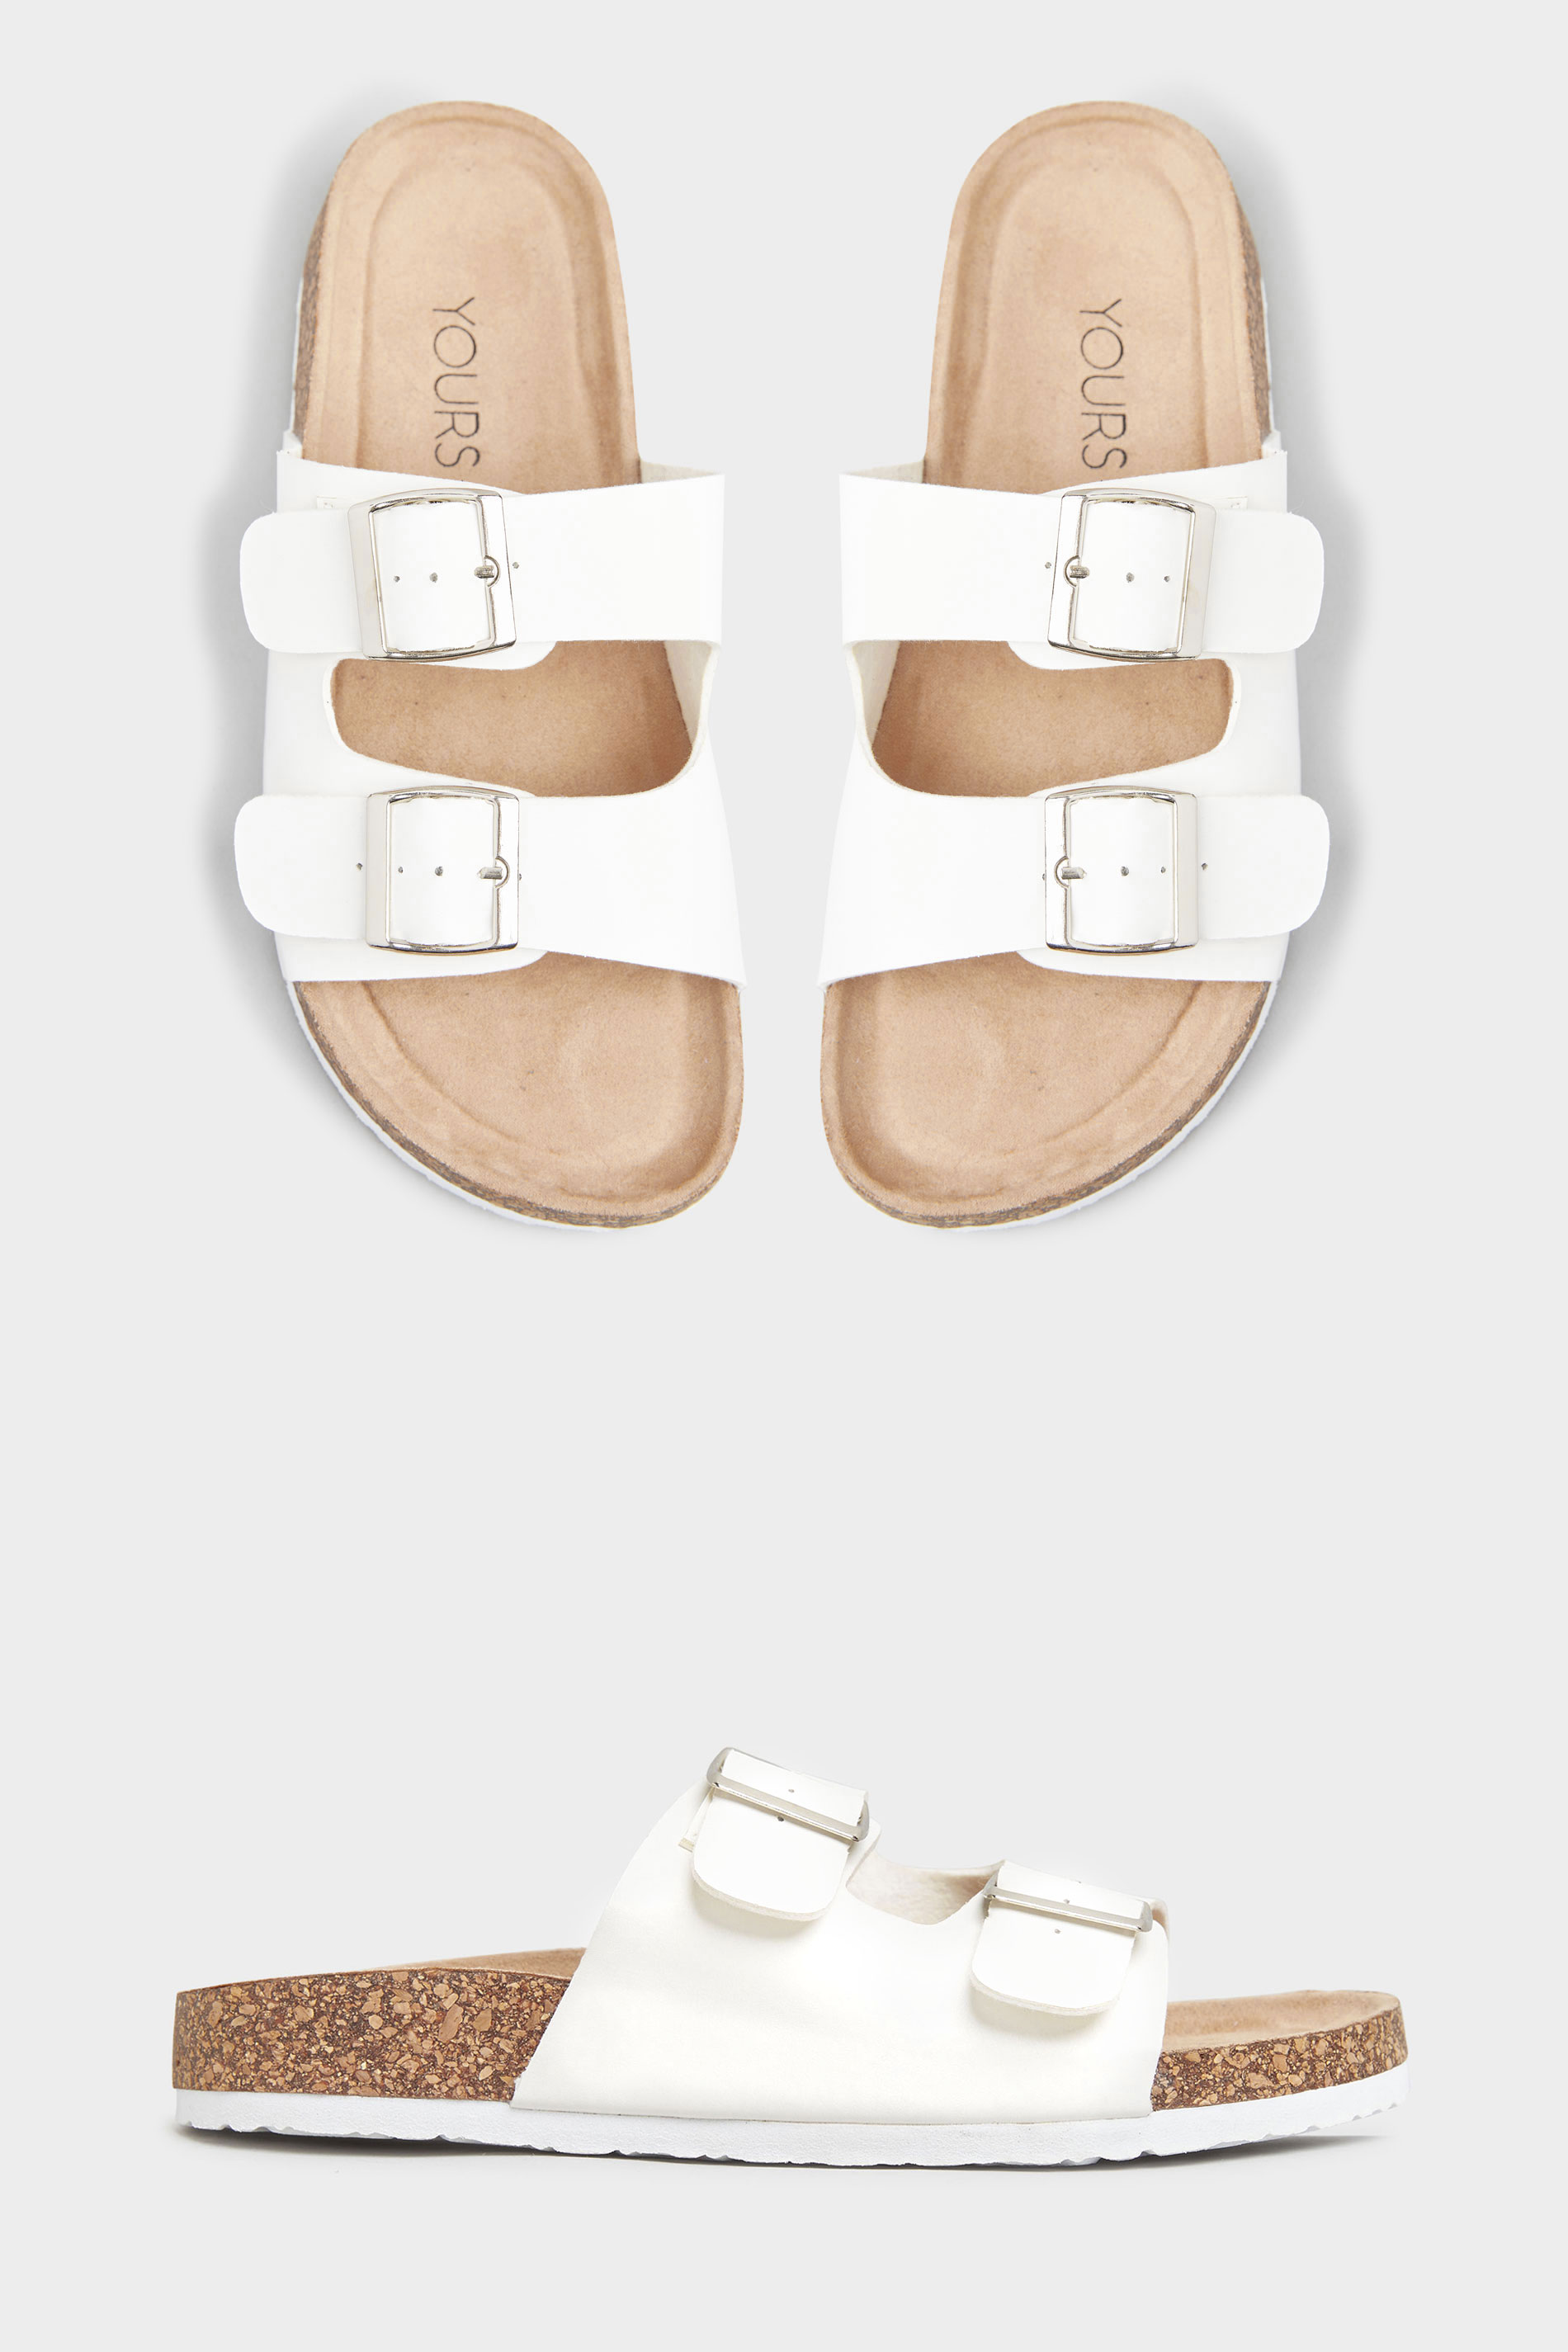 White Buckle Strap Footbed Sandals In Extra Wide EEE Fit | Long Tall Sally